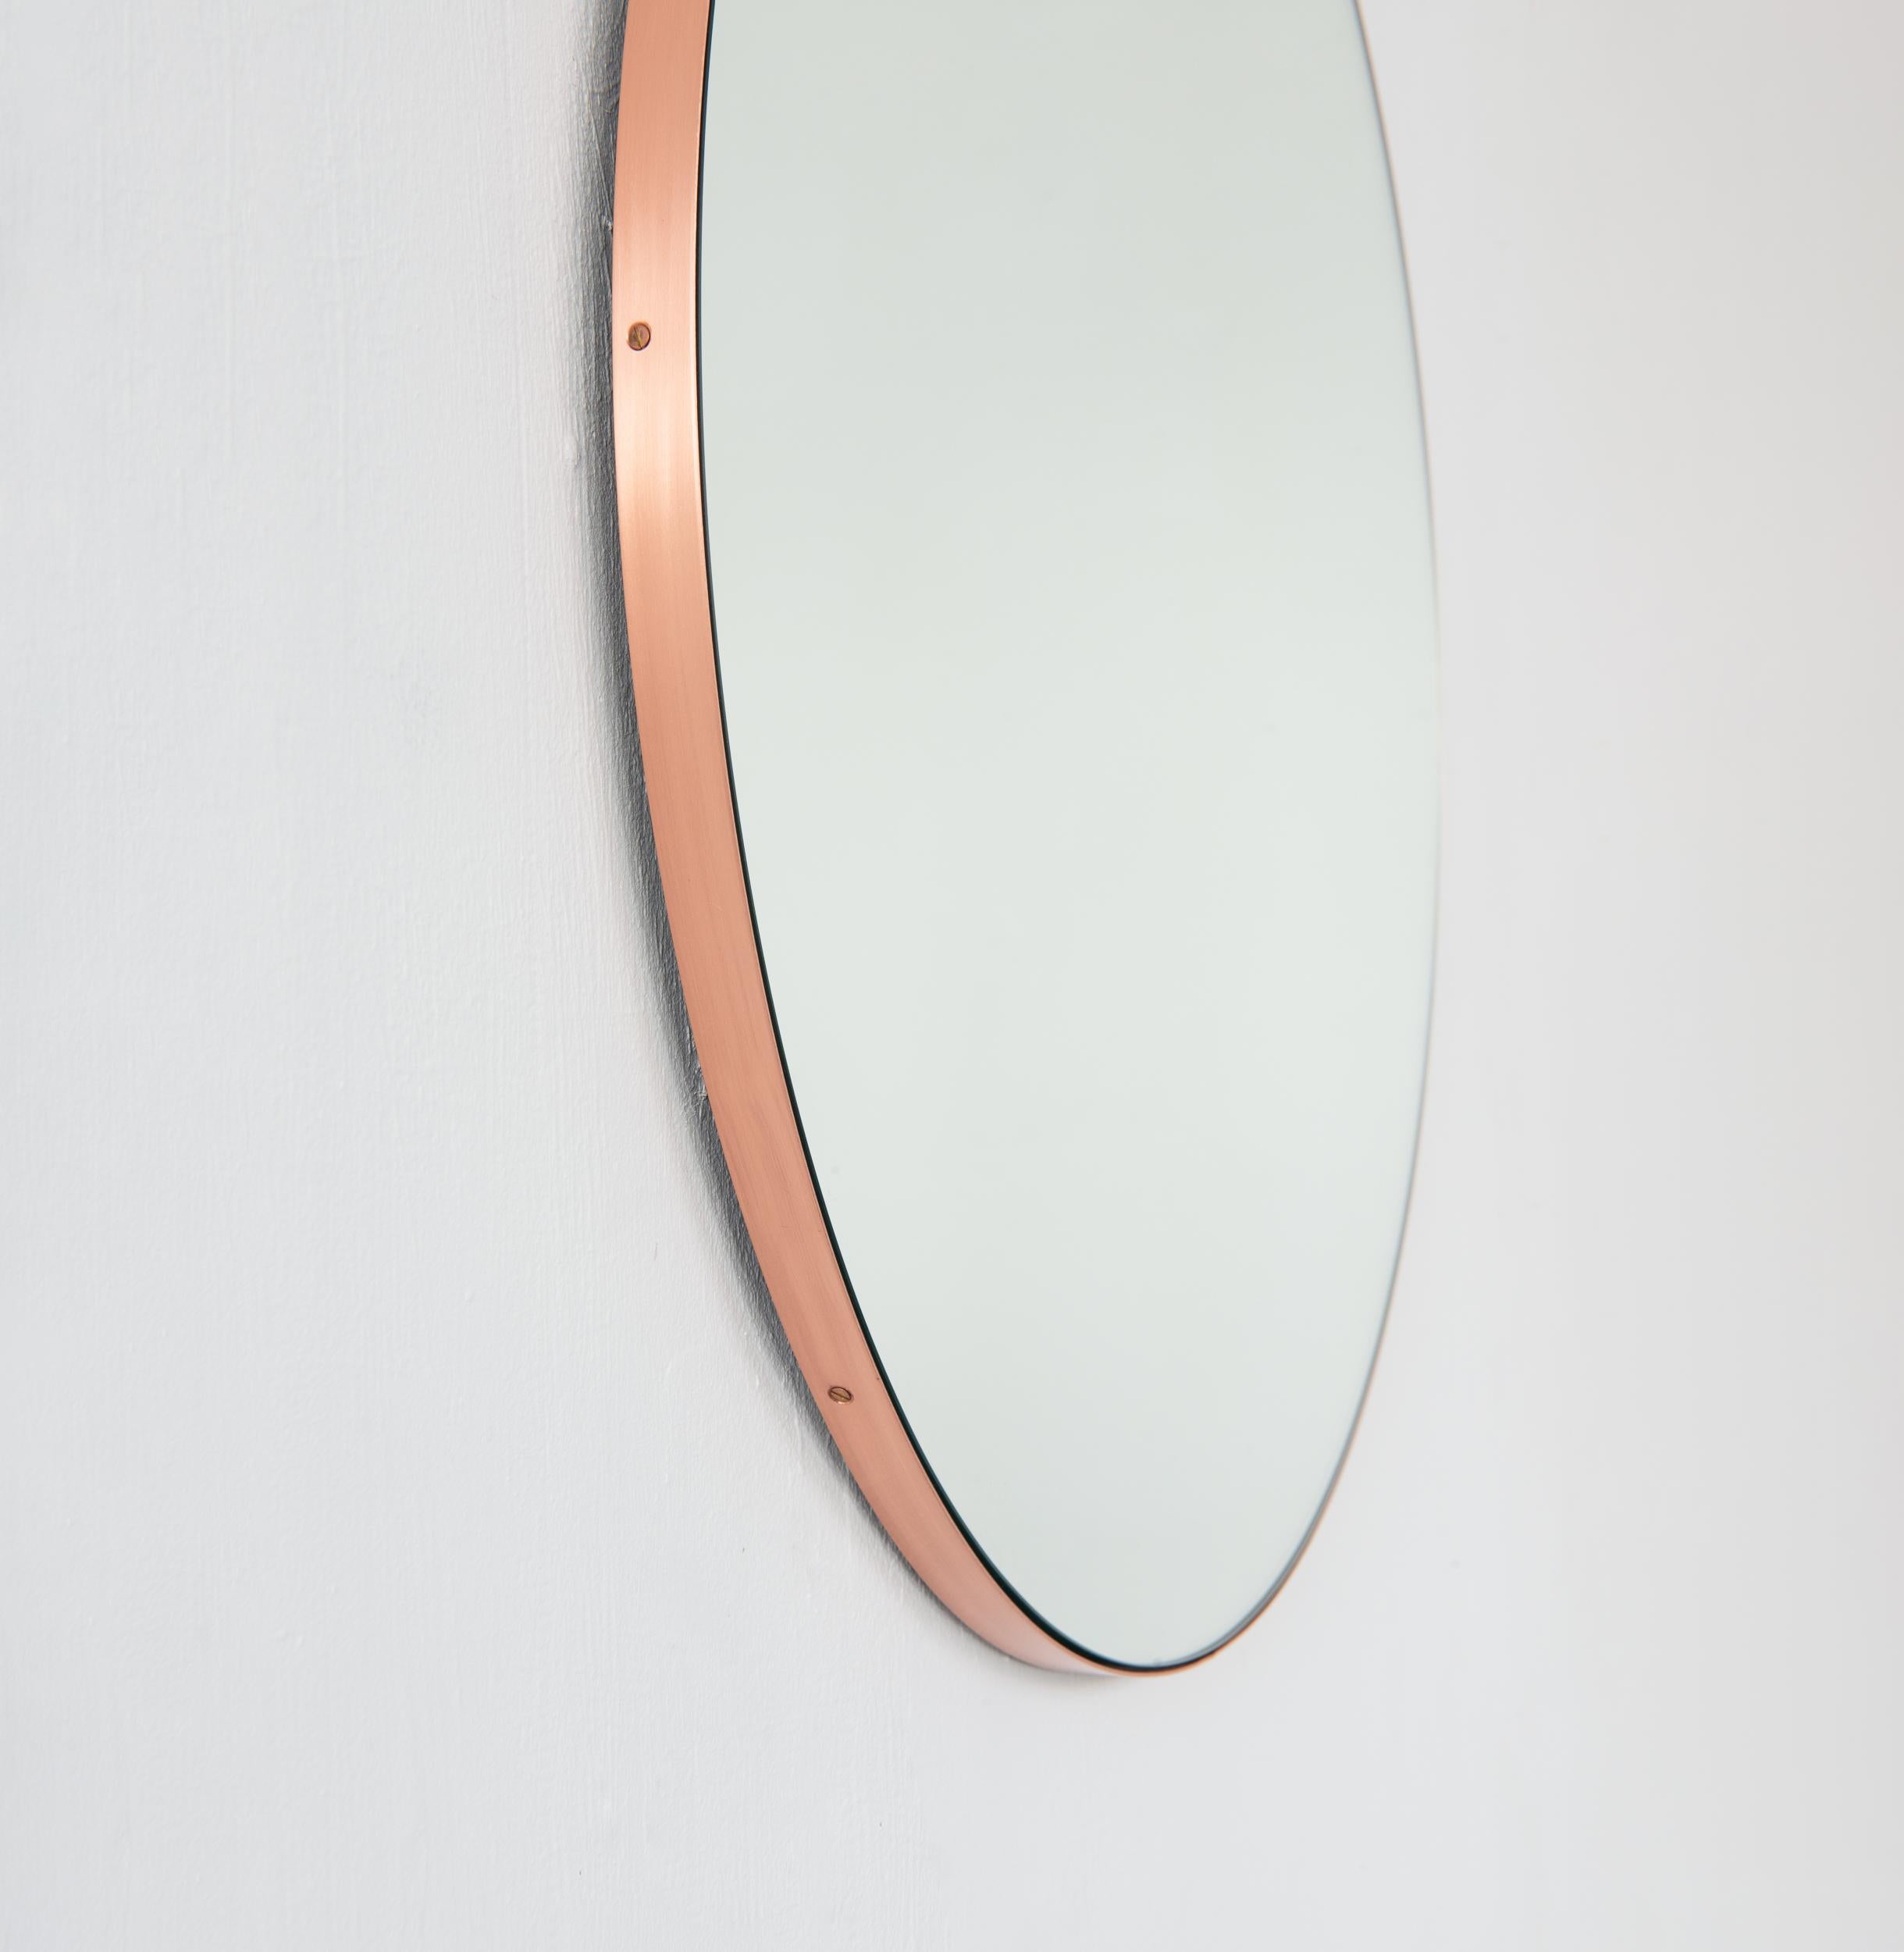 brushed copper mirror